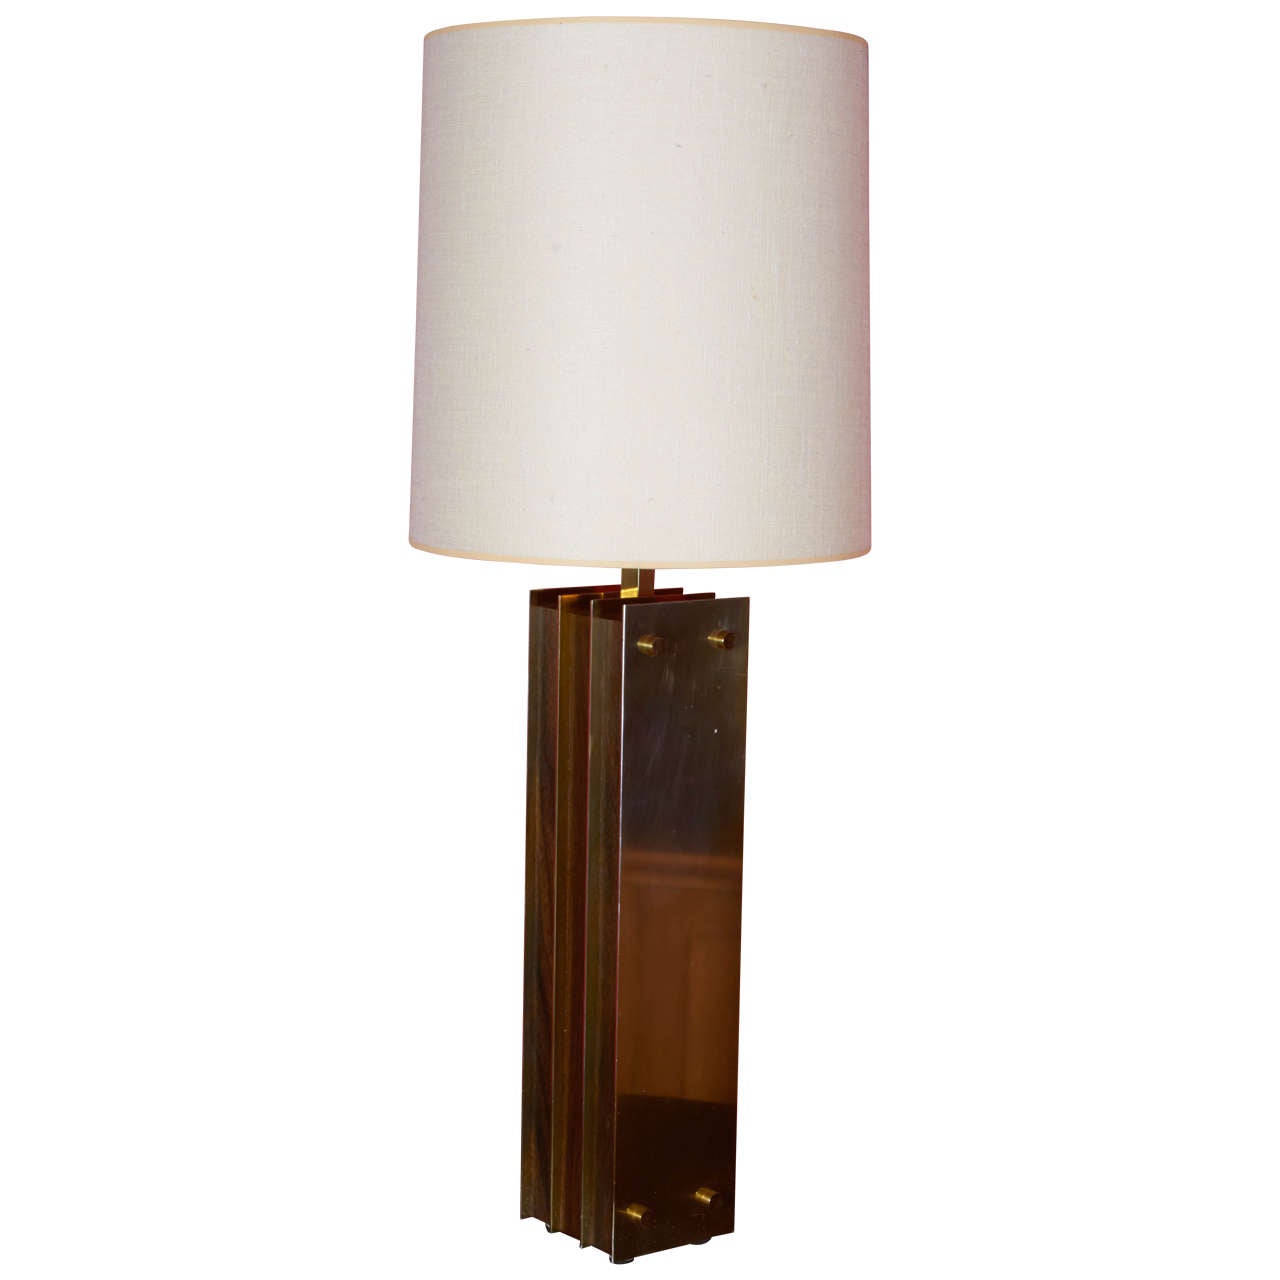 Laurel I Beam Table Lamps with Wood and Brass, 1950s For Sale